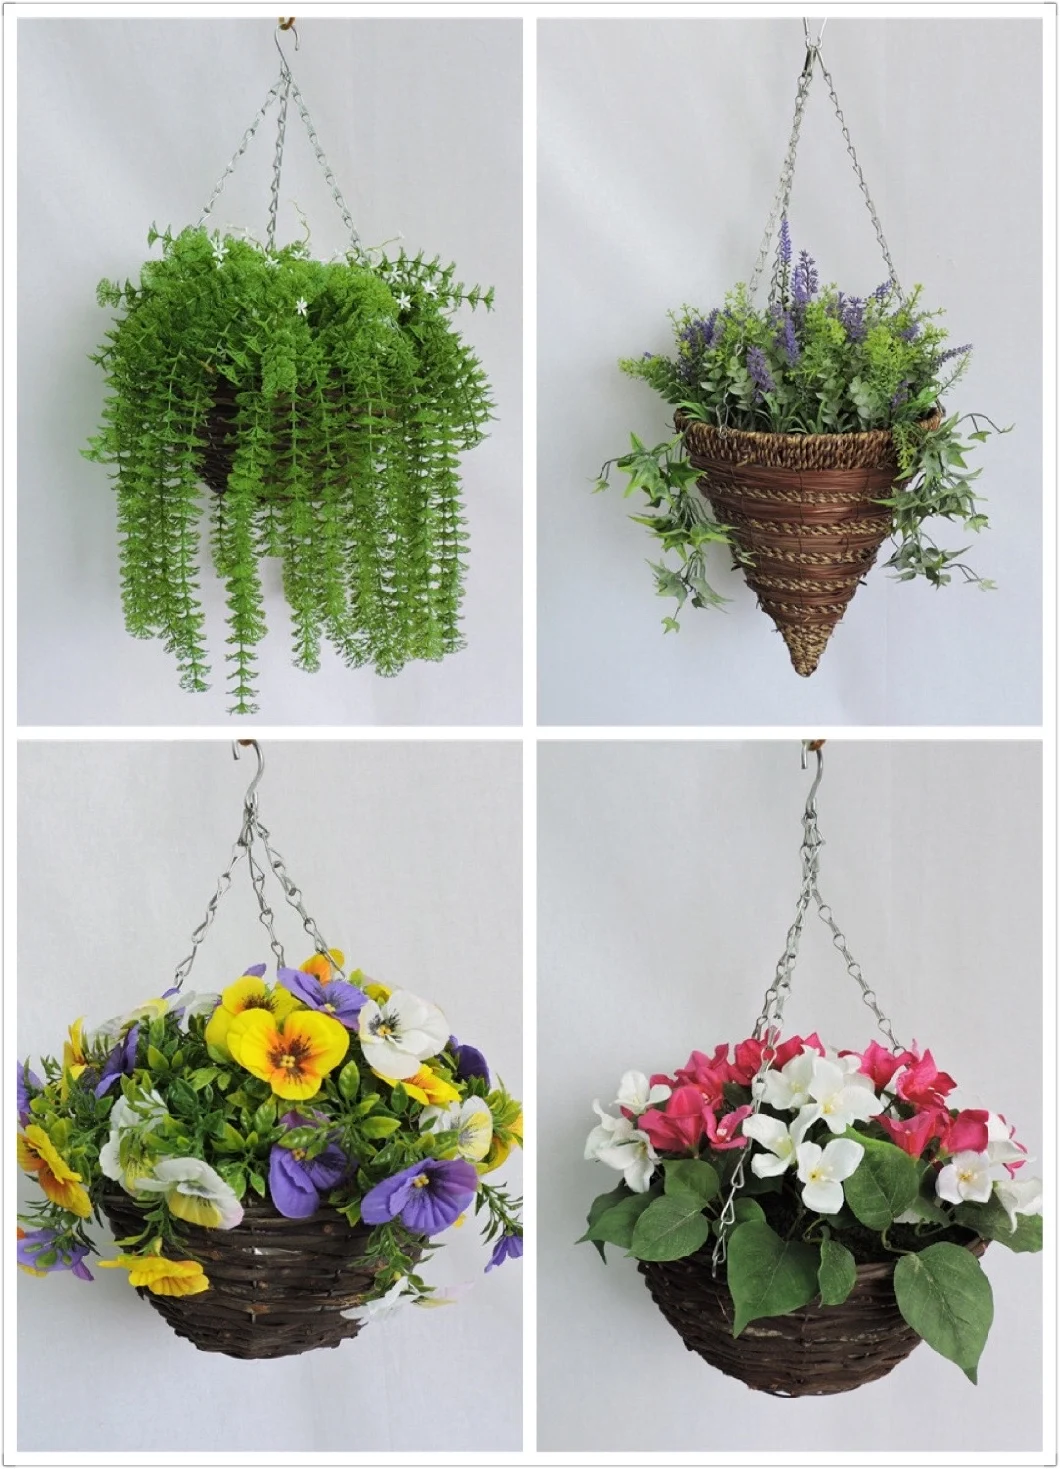 Dia 30cm Hotsale Plastic Long Grass Basket with Hanging Chains